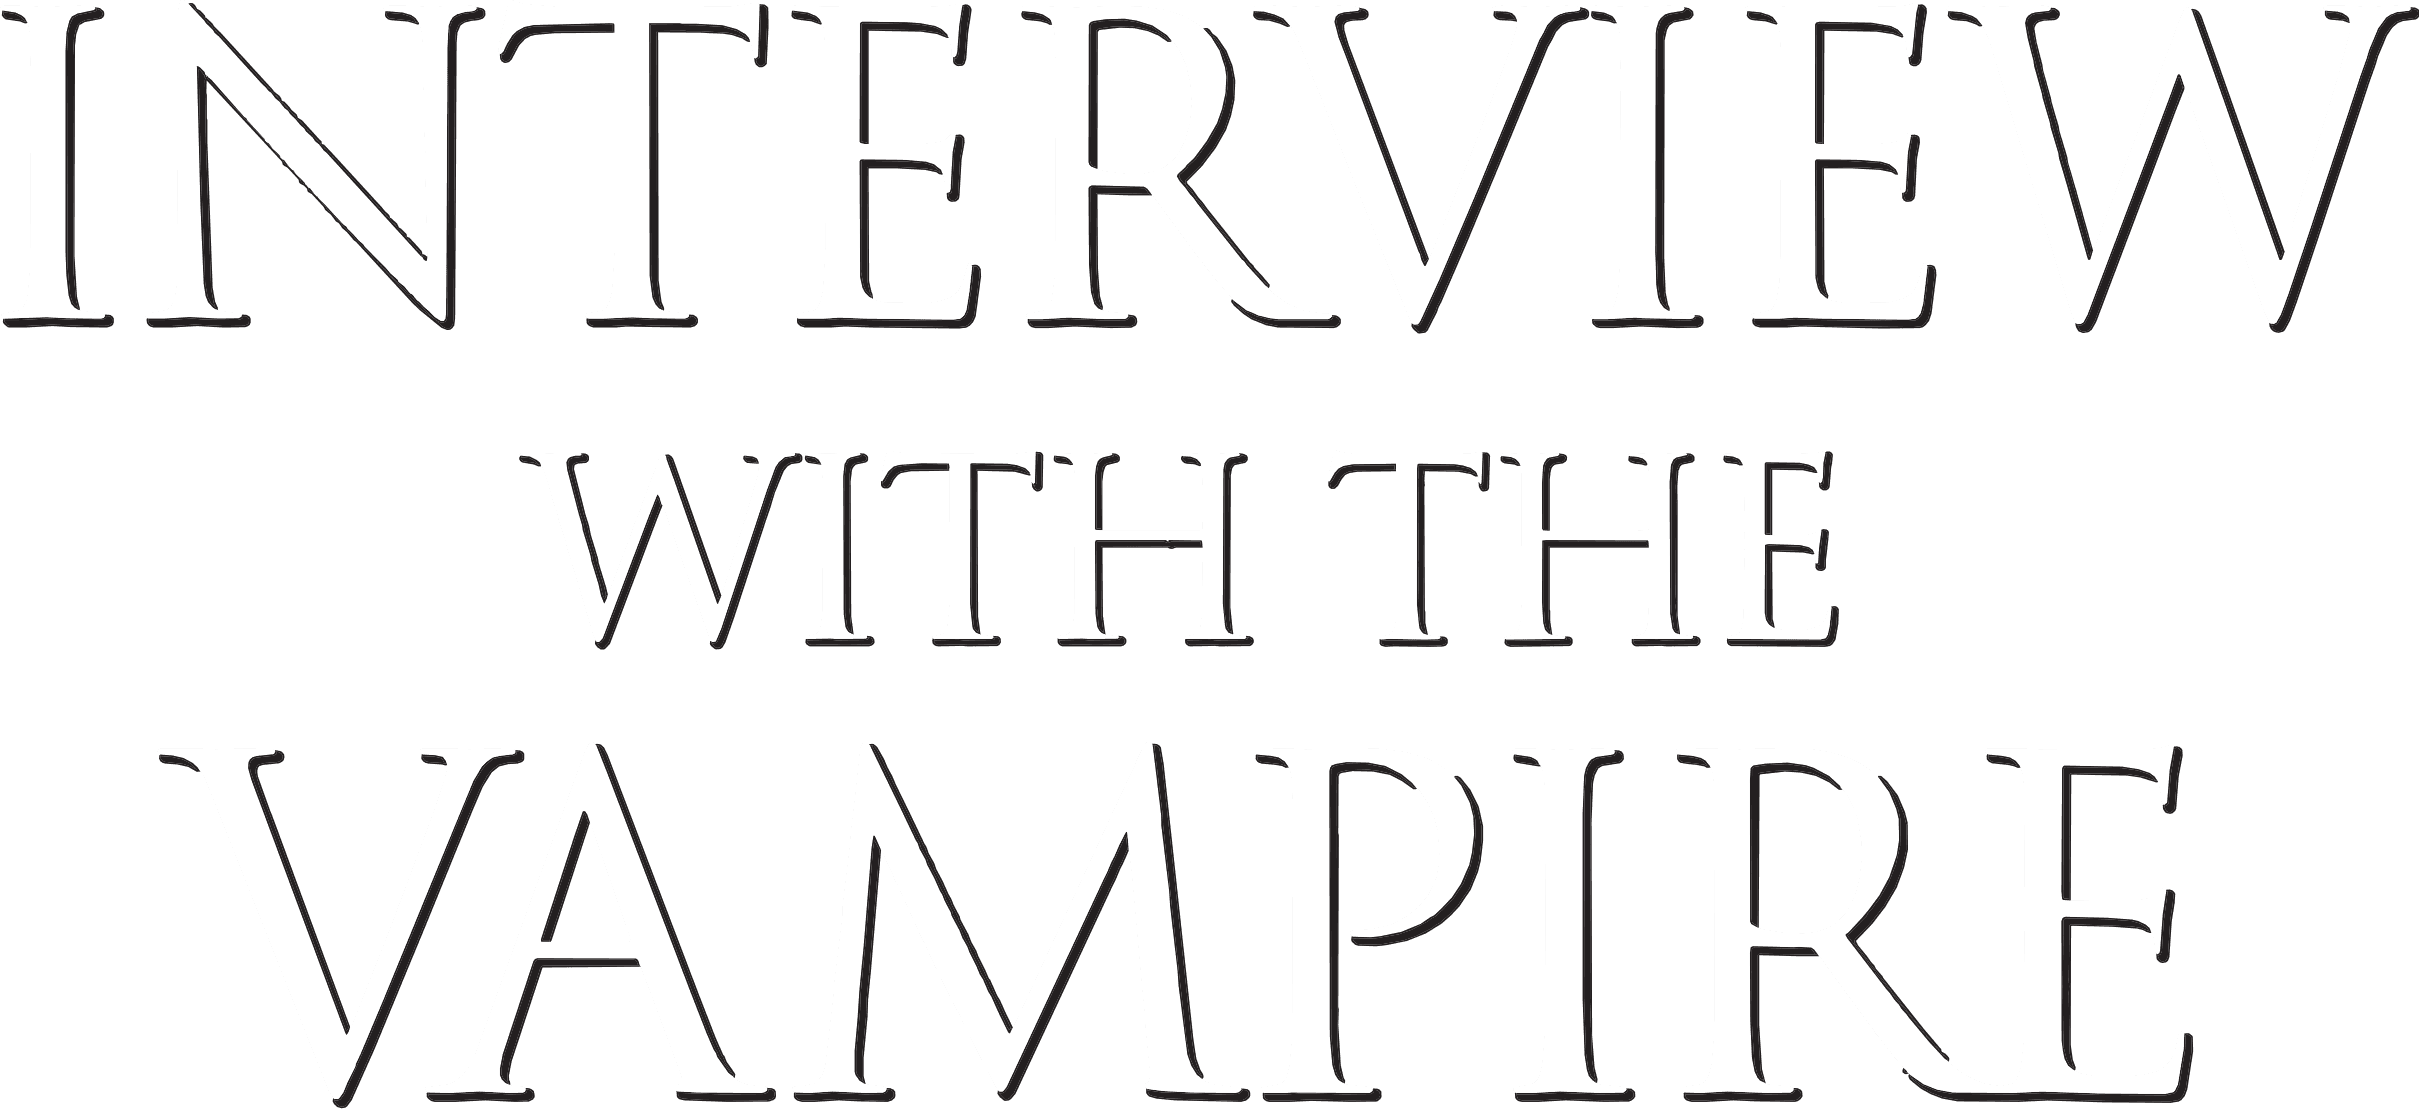 Interview with the Vampire logo